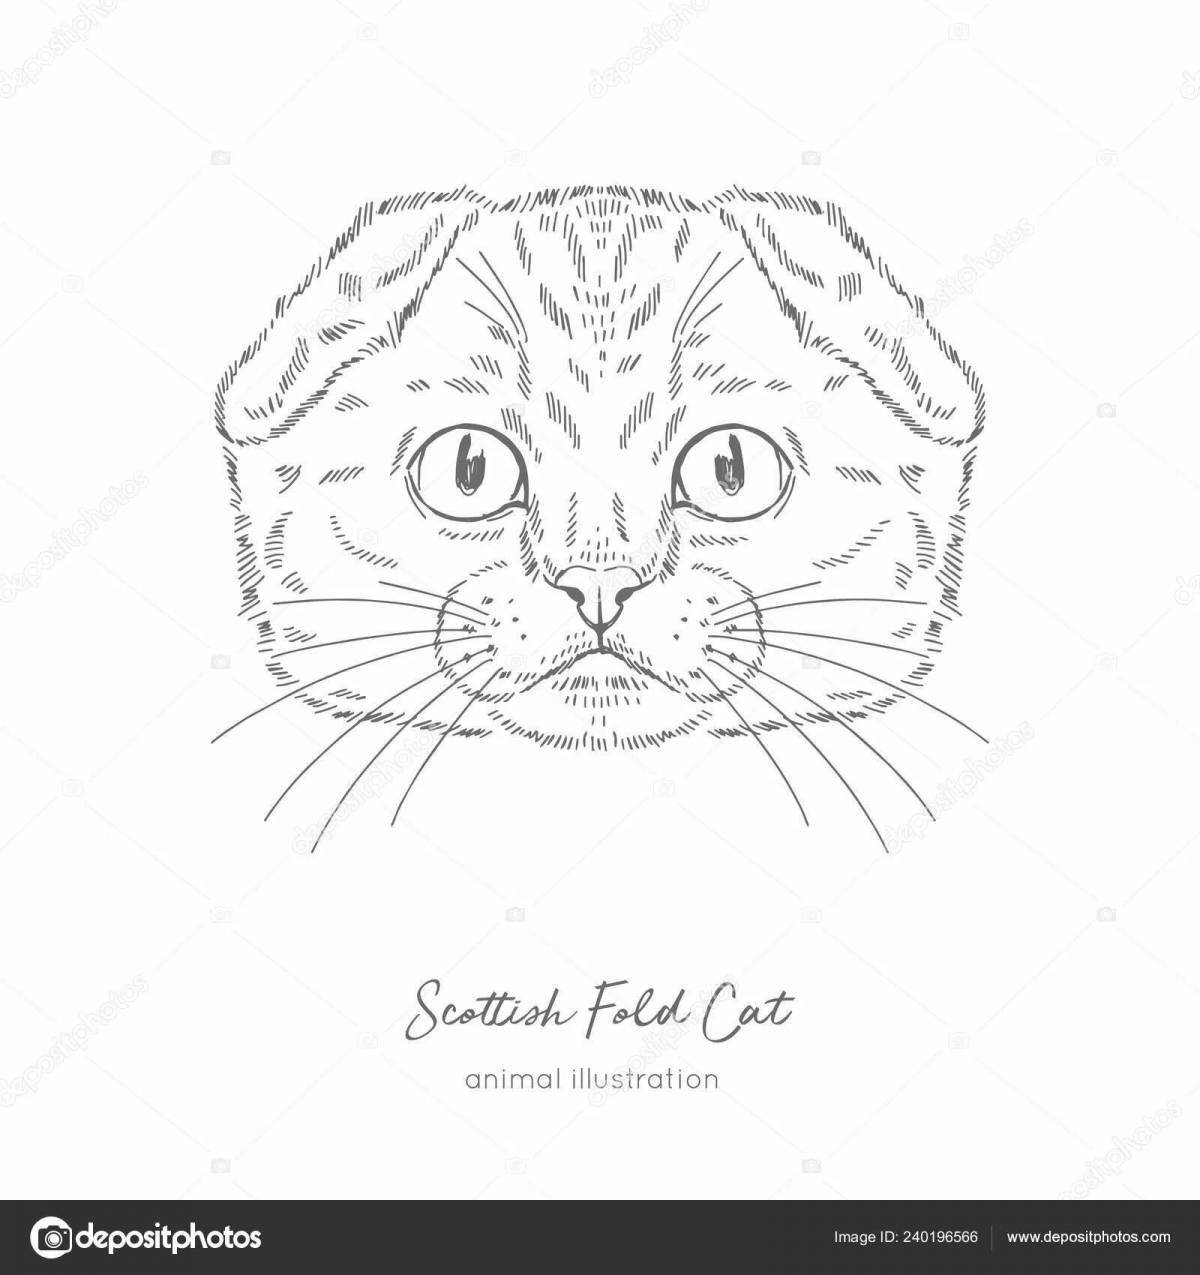 Adorable Scottish Fold kittens coloring page